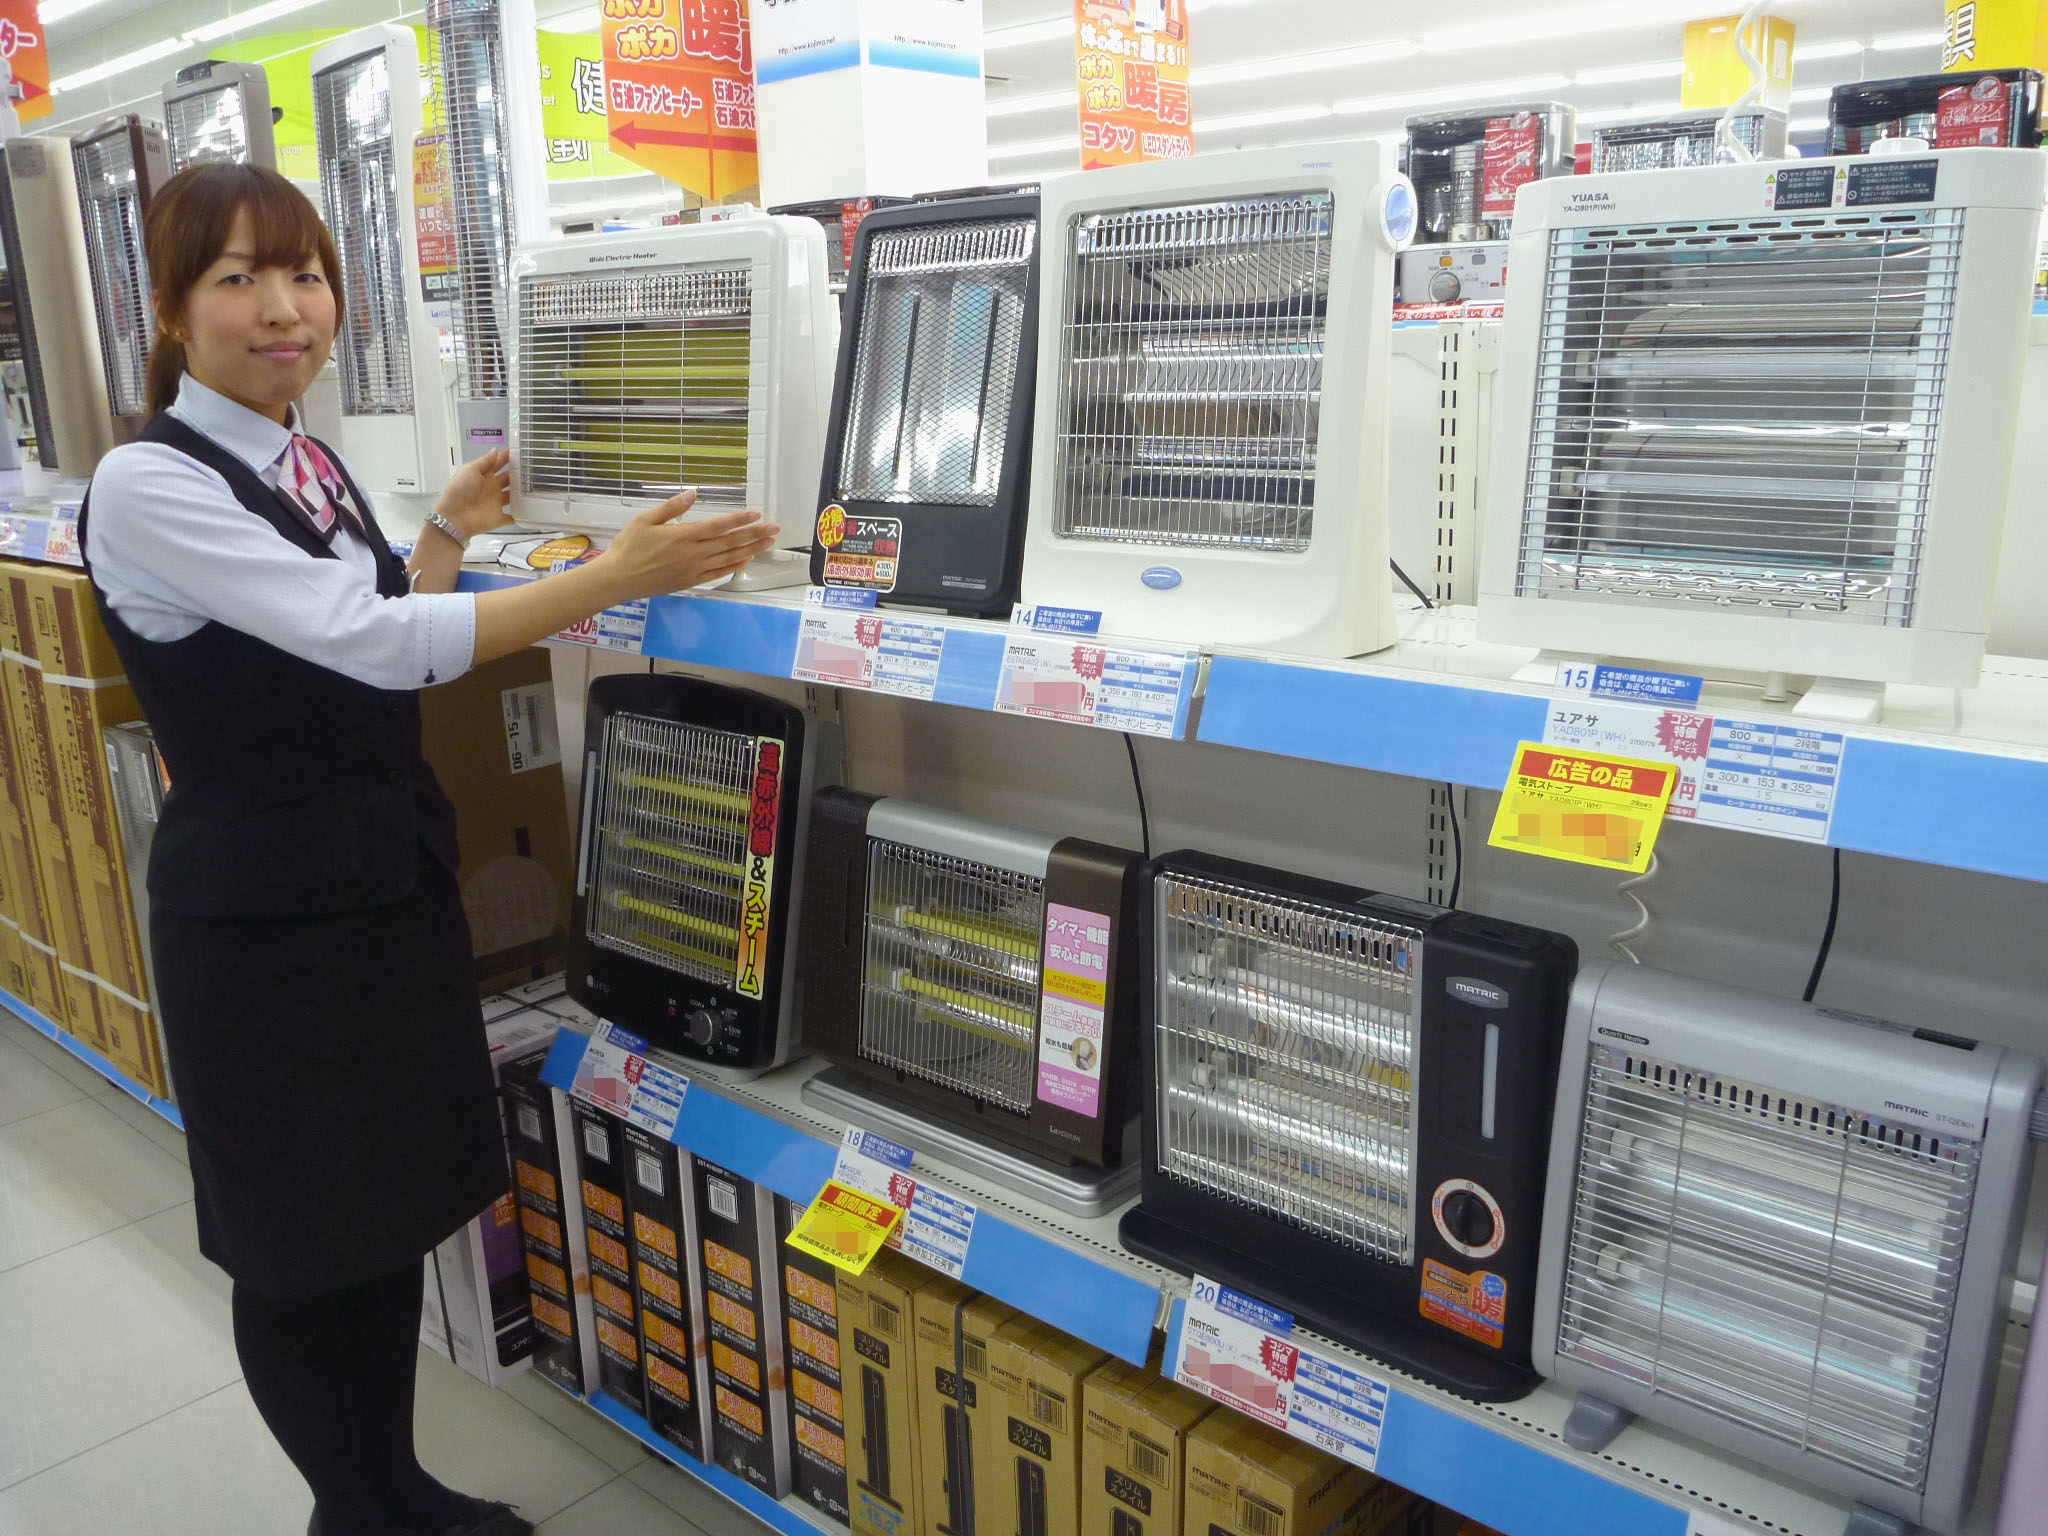 Japanese Home Appliances Most Advanced Technology 